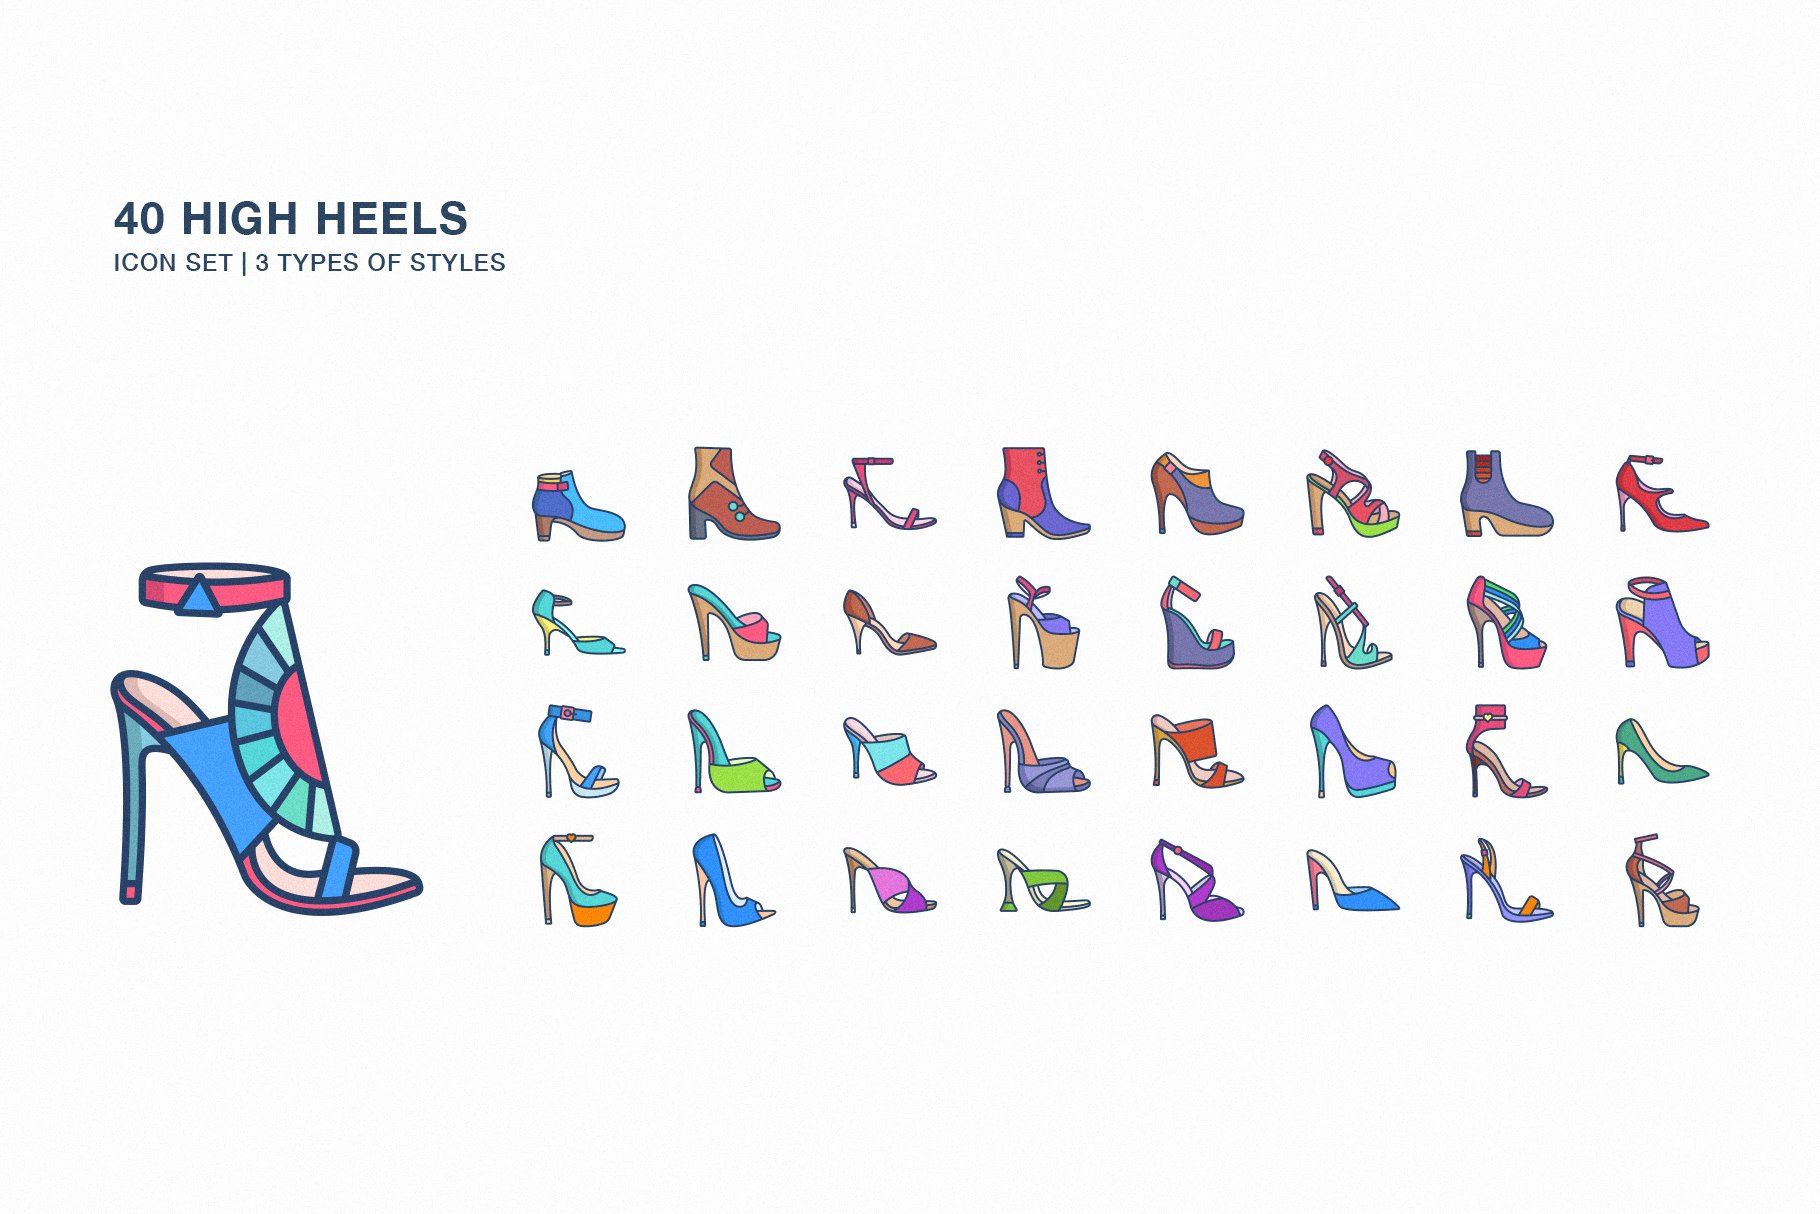 High Heels icon set cover image.